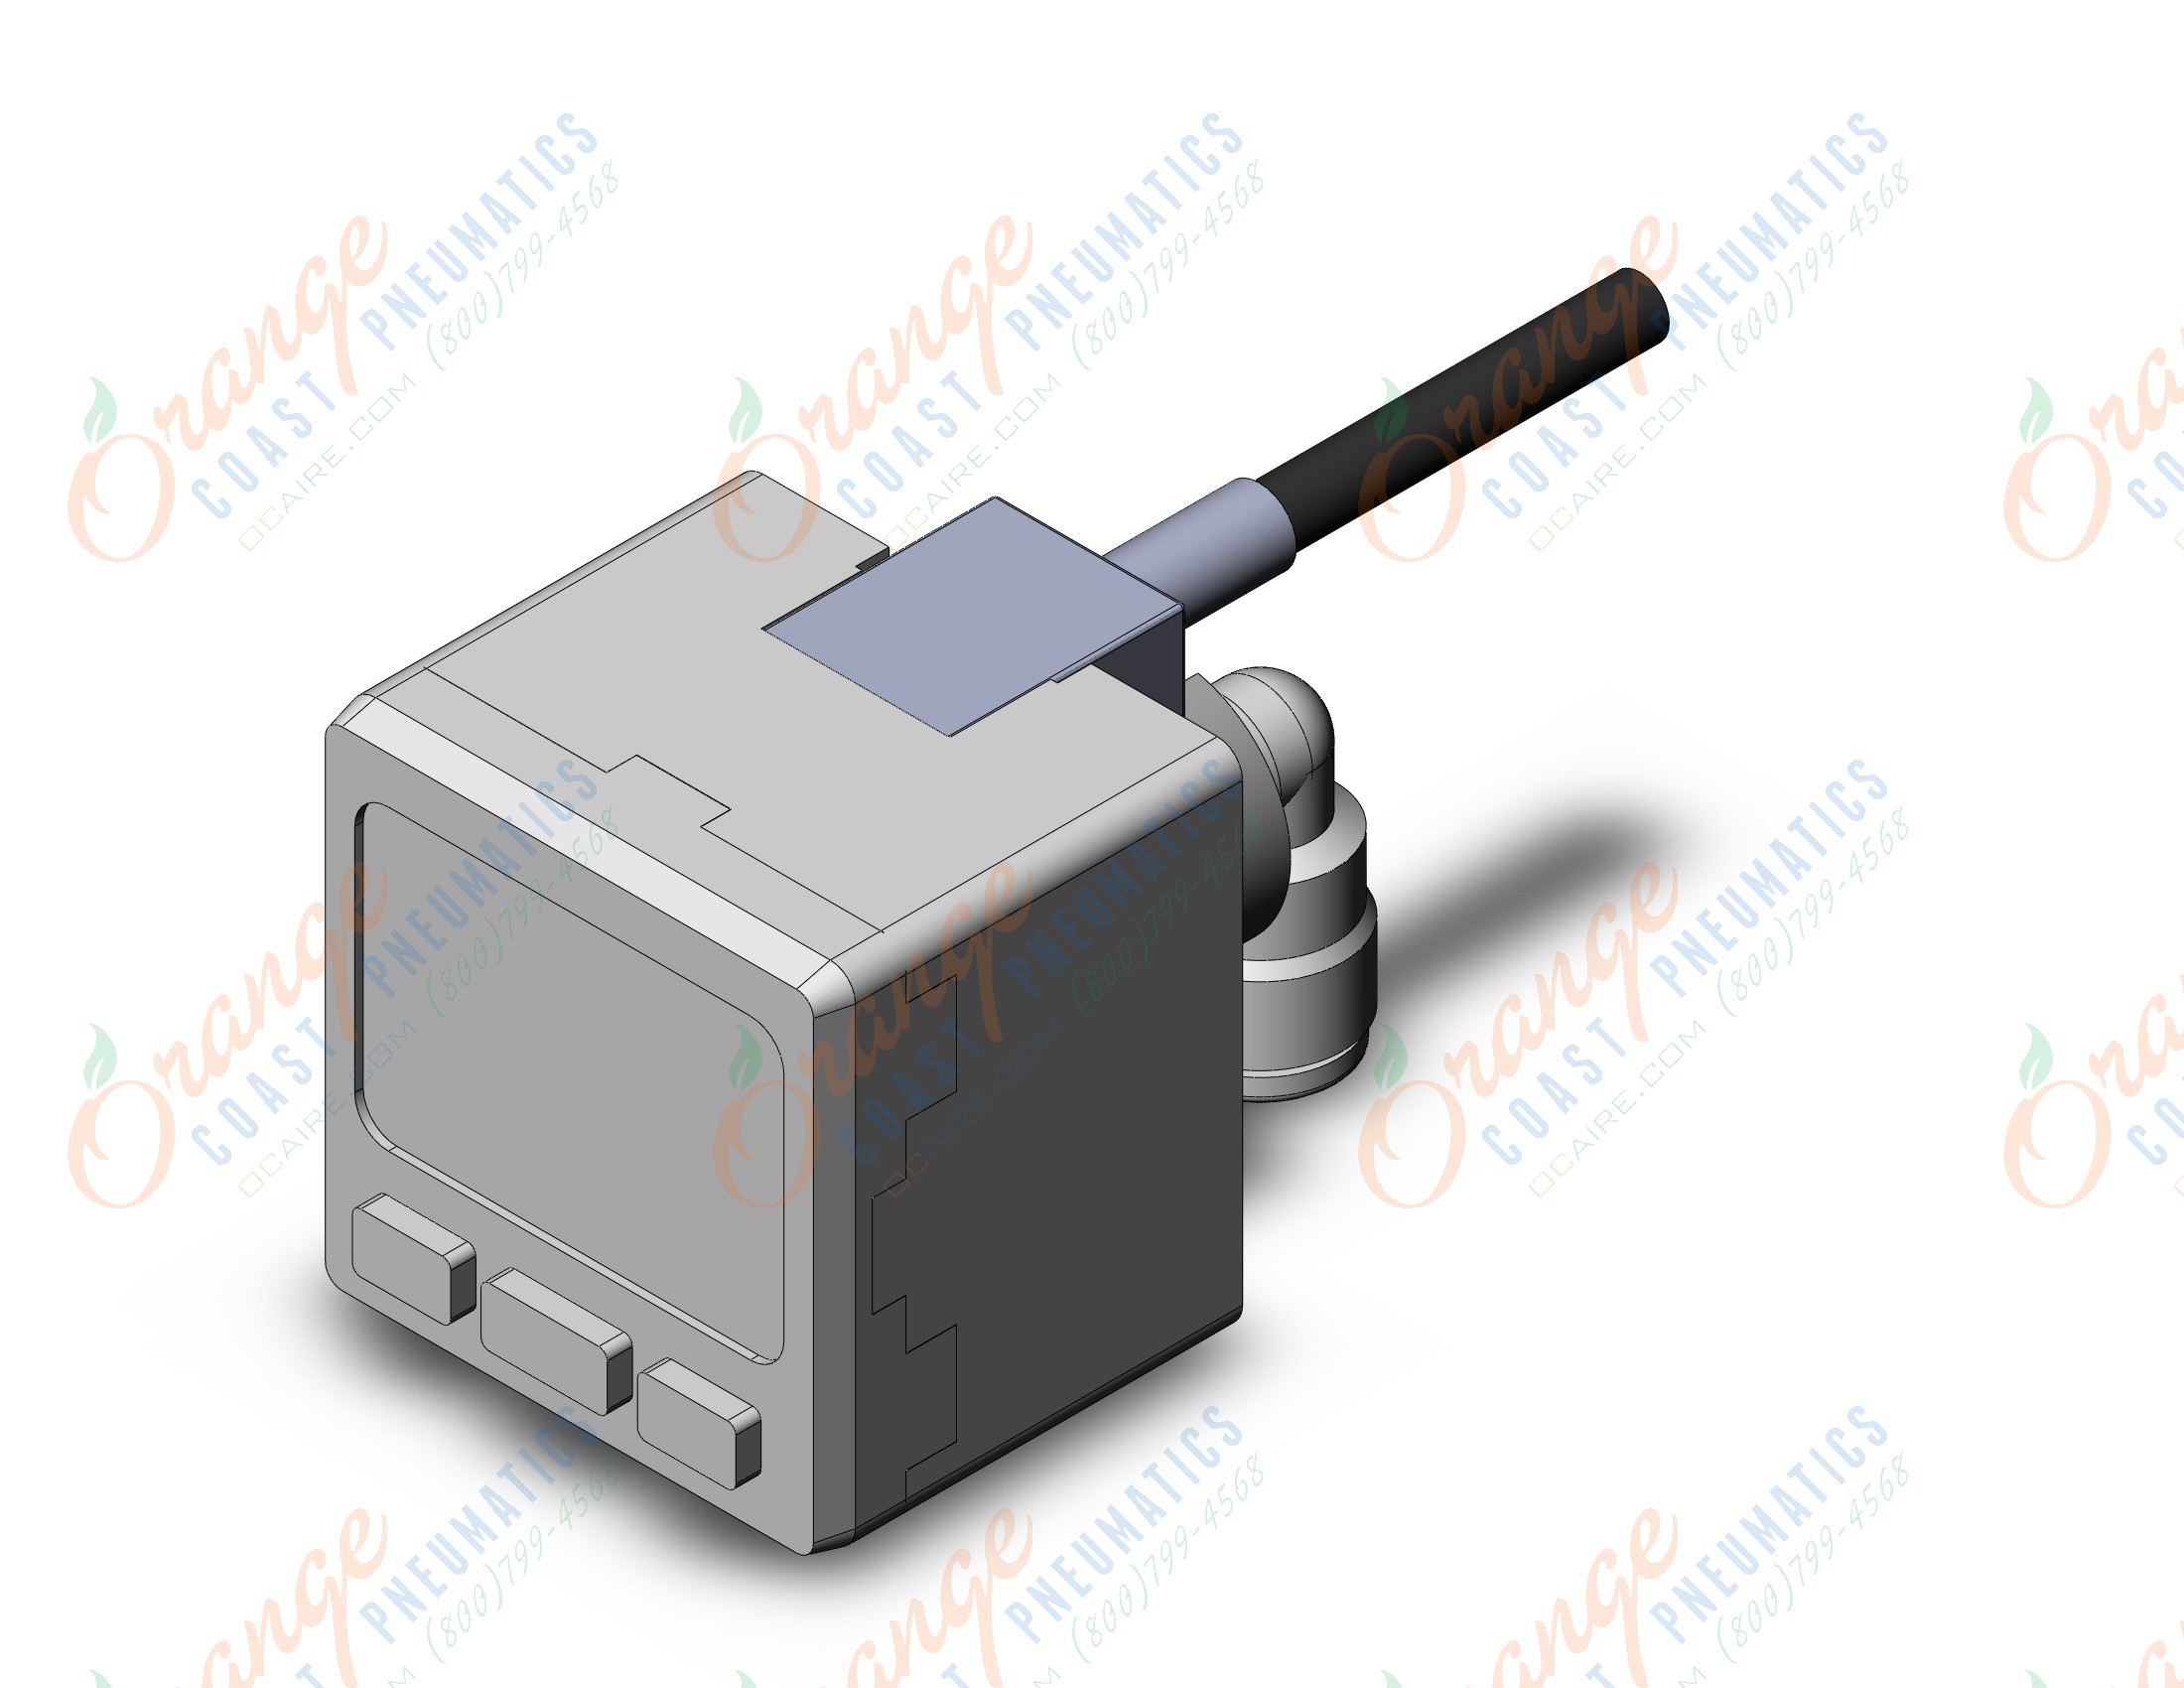 SMC ISE30A-C4L-B-G-X510 2 color high precision dig pres switch, PRESSURE SWITCH, ISE30, ISE30A